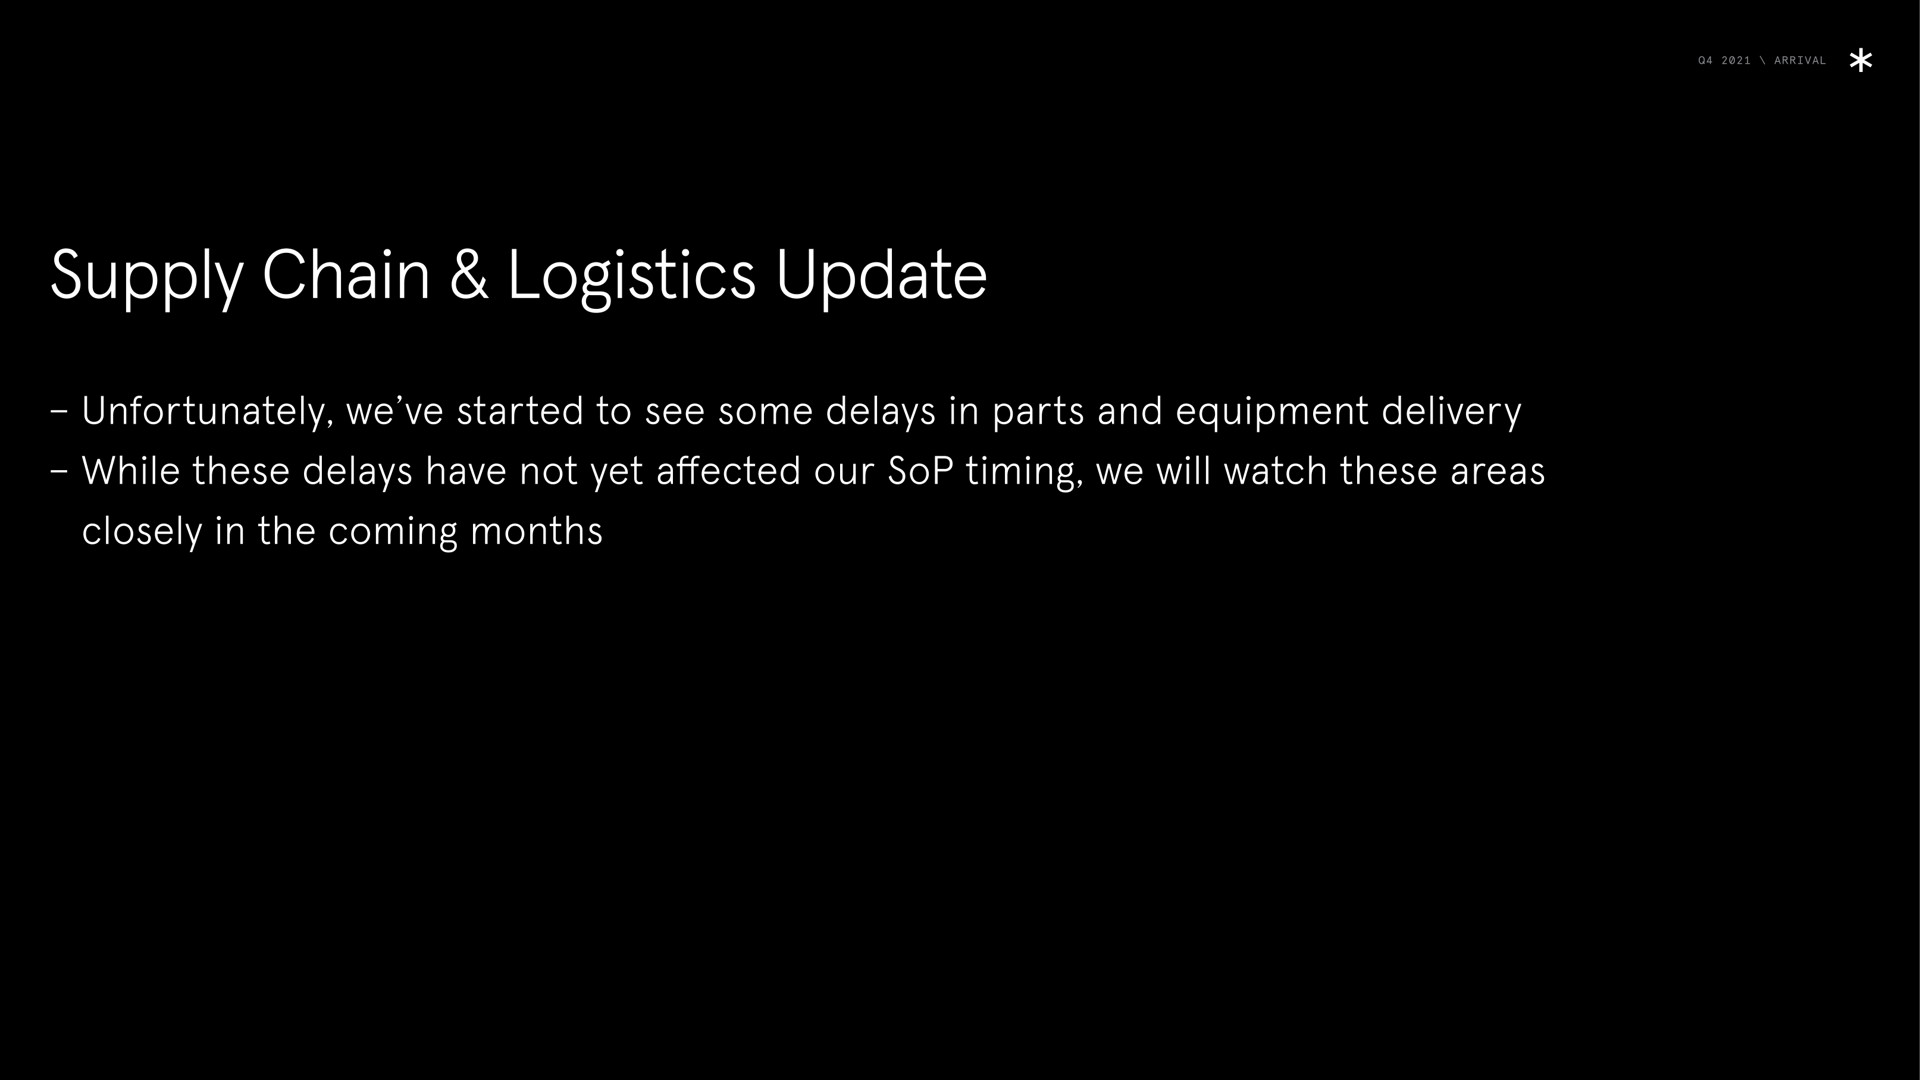 arrival supply chain logistics update unfortunately we started to see some delays in parts and equipment delivery while these delays have not yet affected our sop timing we will watch these areas closely in the coming months | Arrival